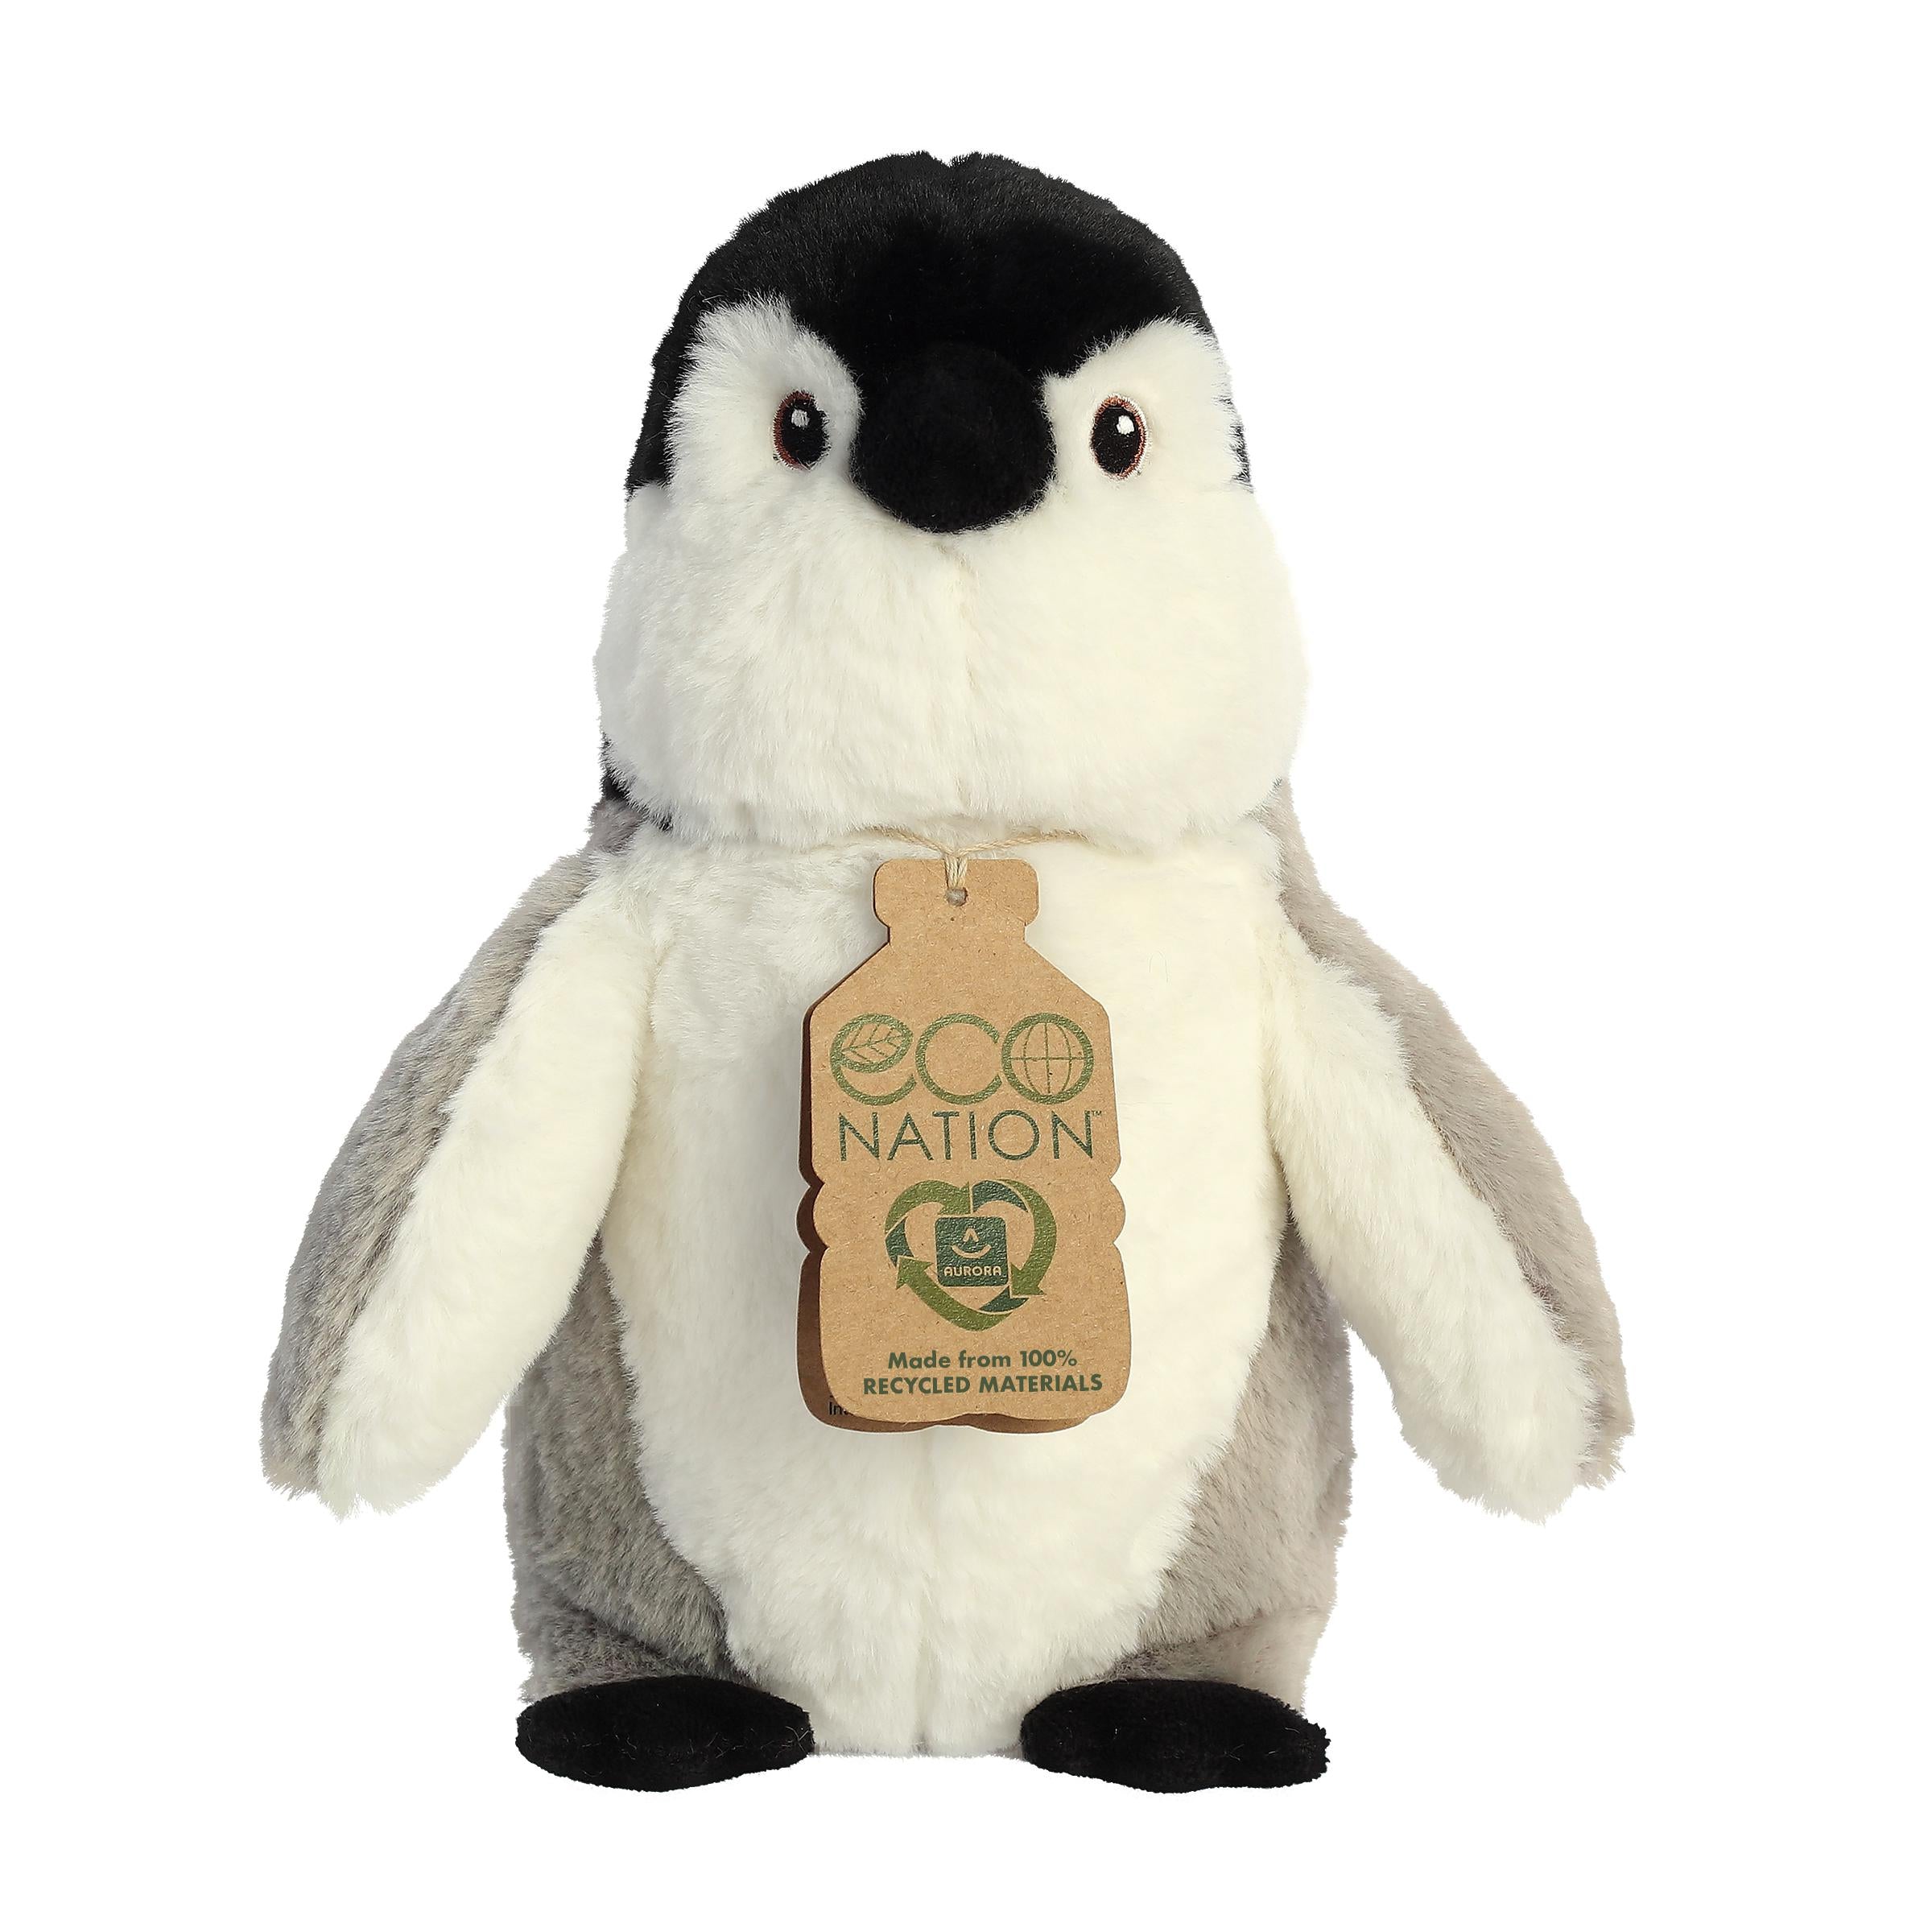 A sweet penguin plush with a white and grey coat, gentle embroidered eyes, and an eco-nation tag hanging from its neck